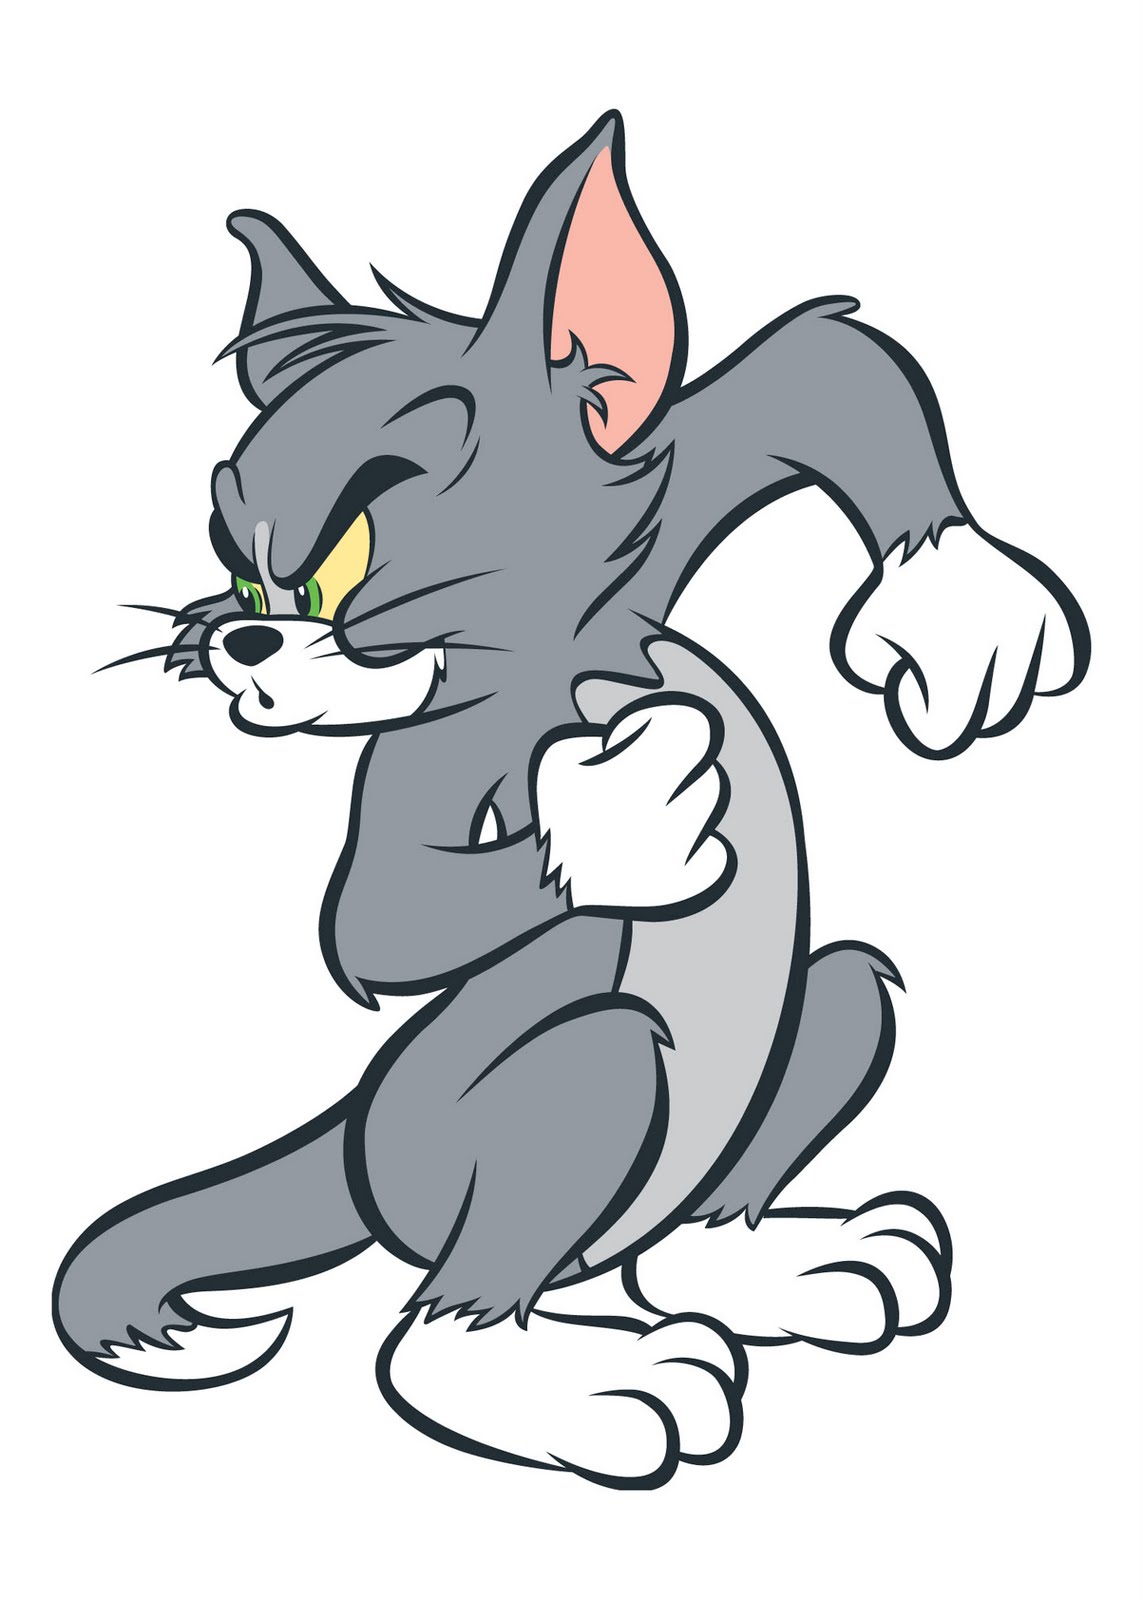 Patrick Owsley Cartoon Art and More!: TOM AND JERRY!